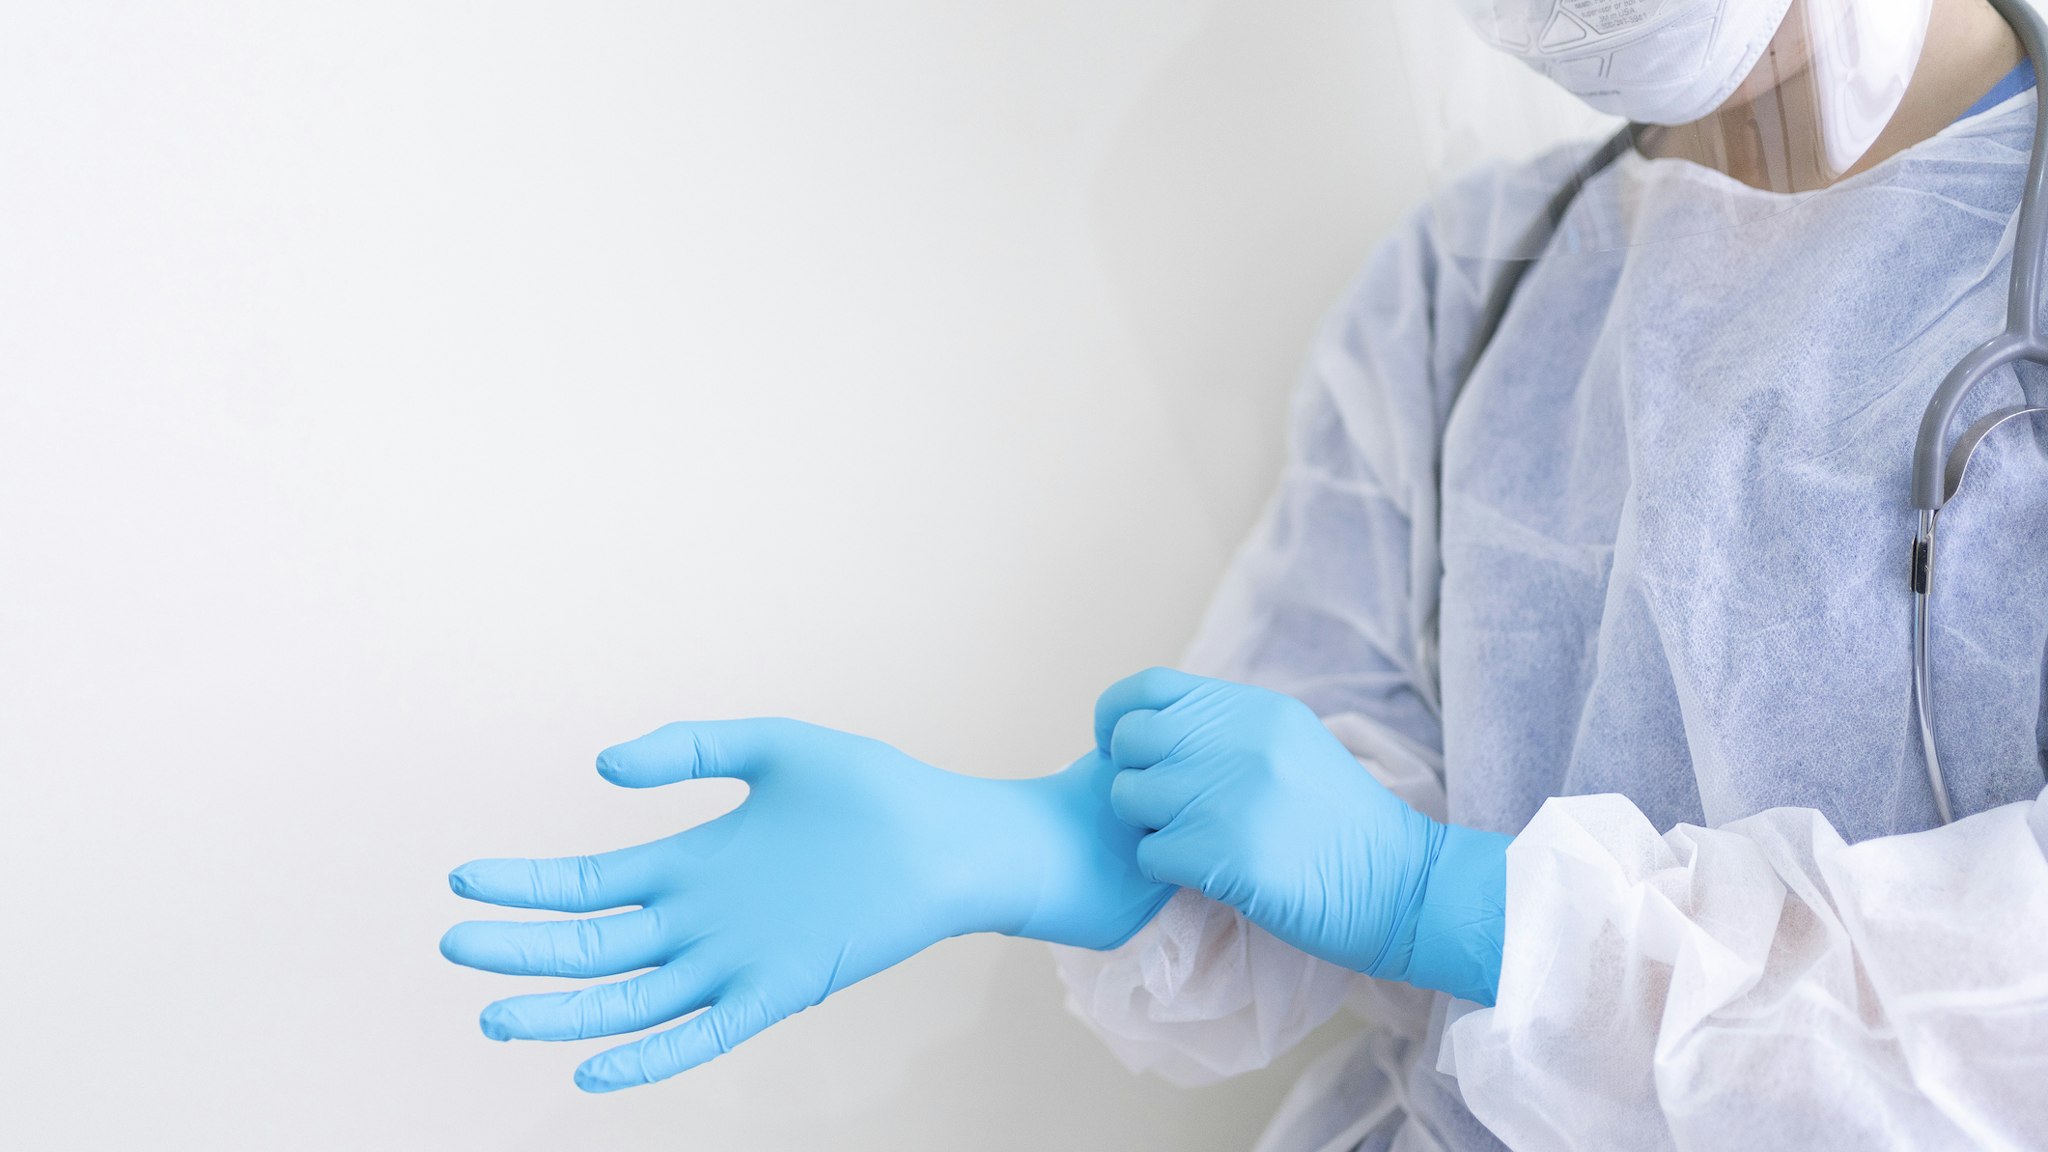 Doctor wearing PPE Suite (Personal Protection Equipment)holding serum glass tube Concept of coronavirus quarantine - stock photo